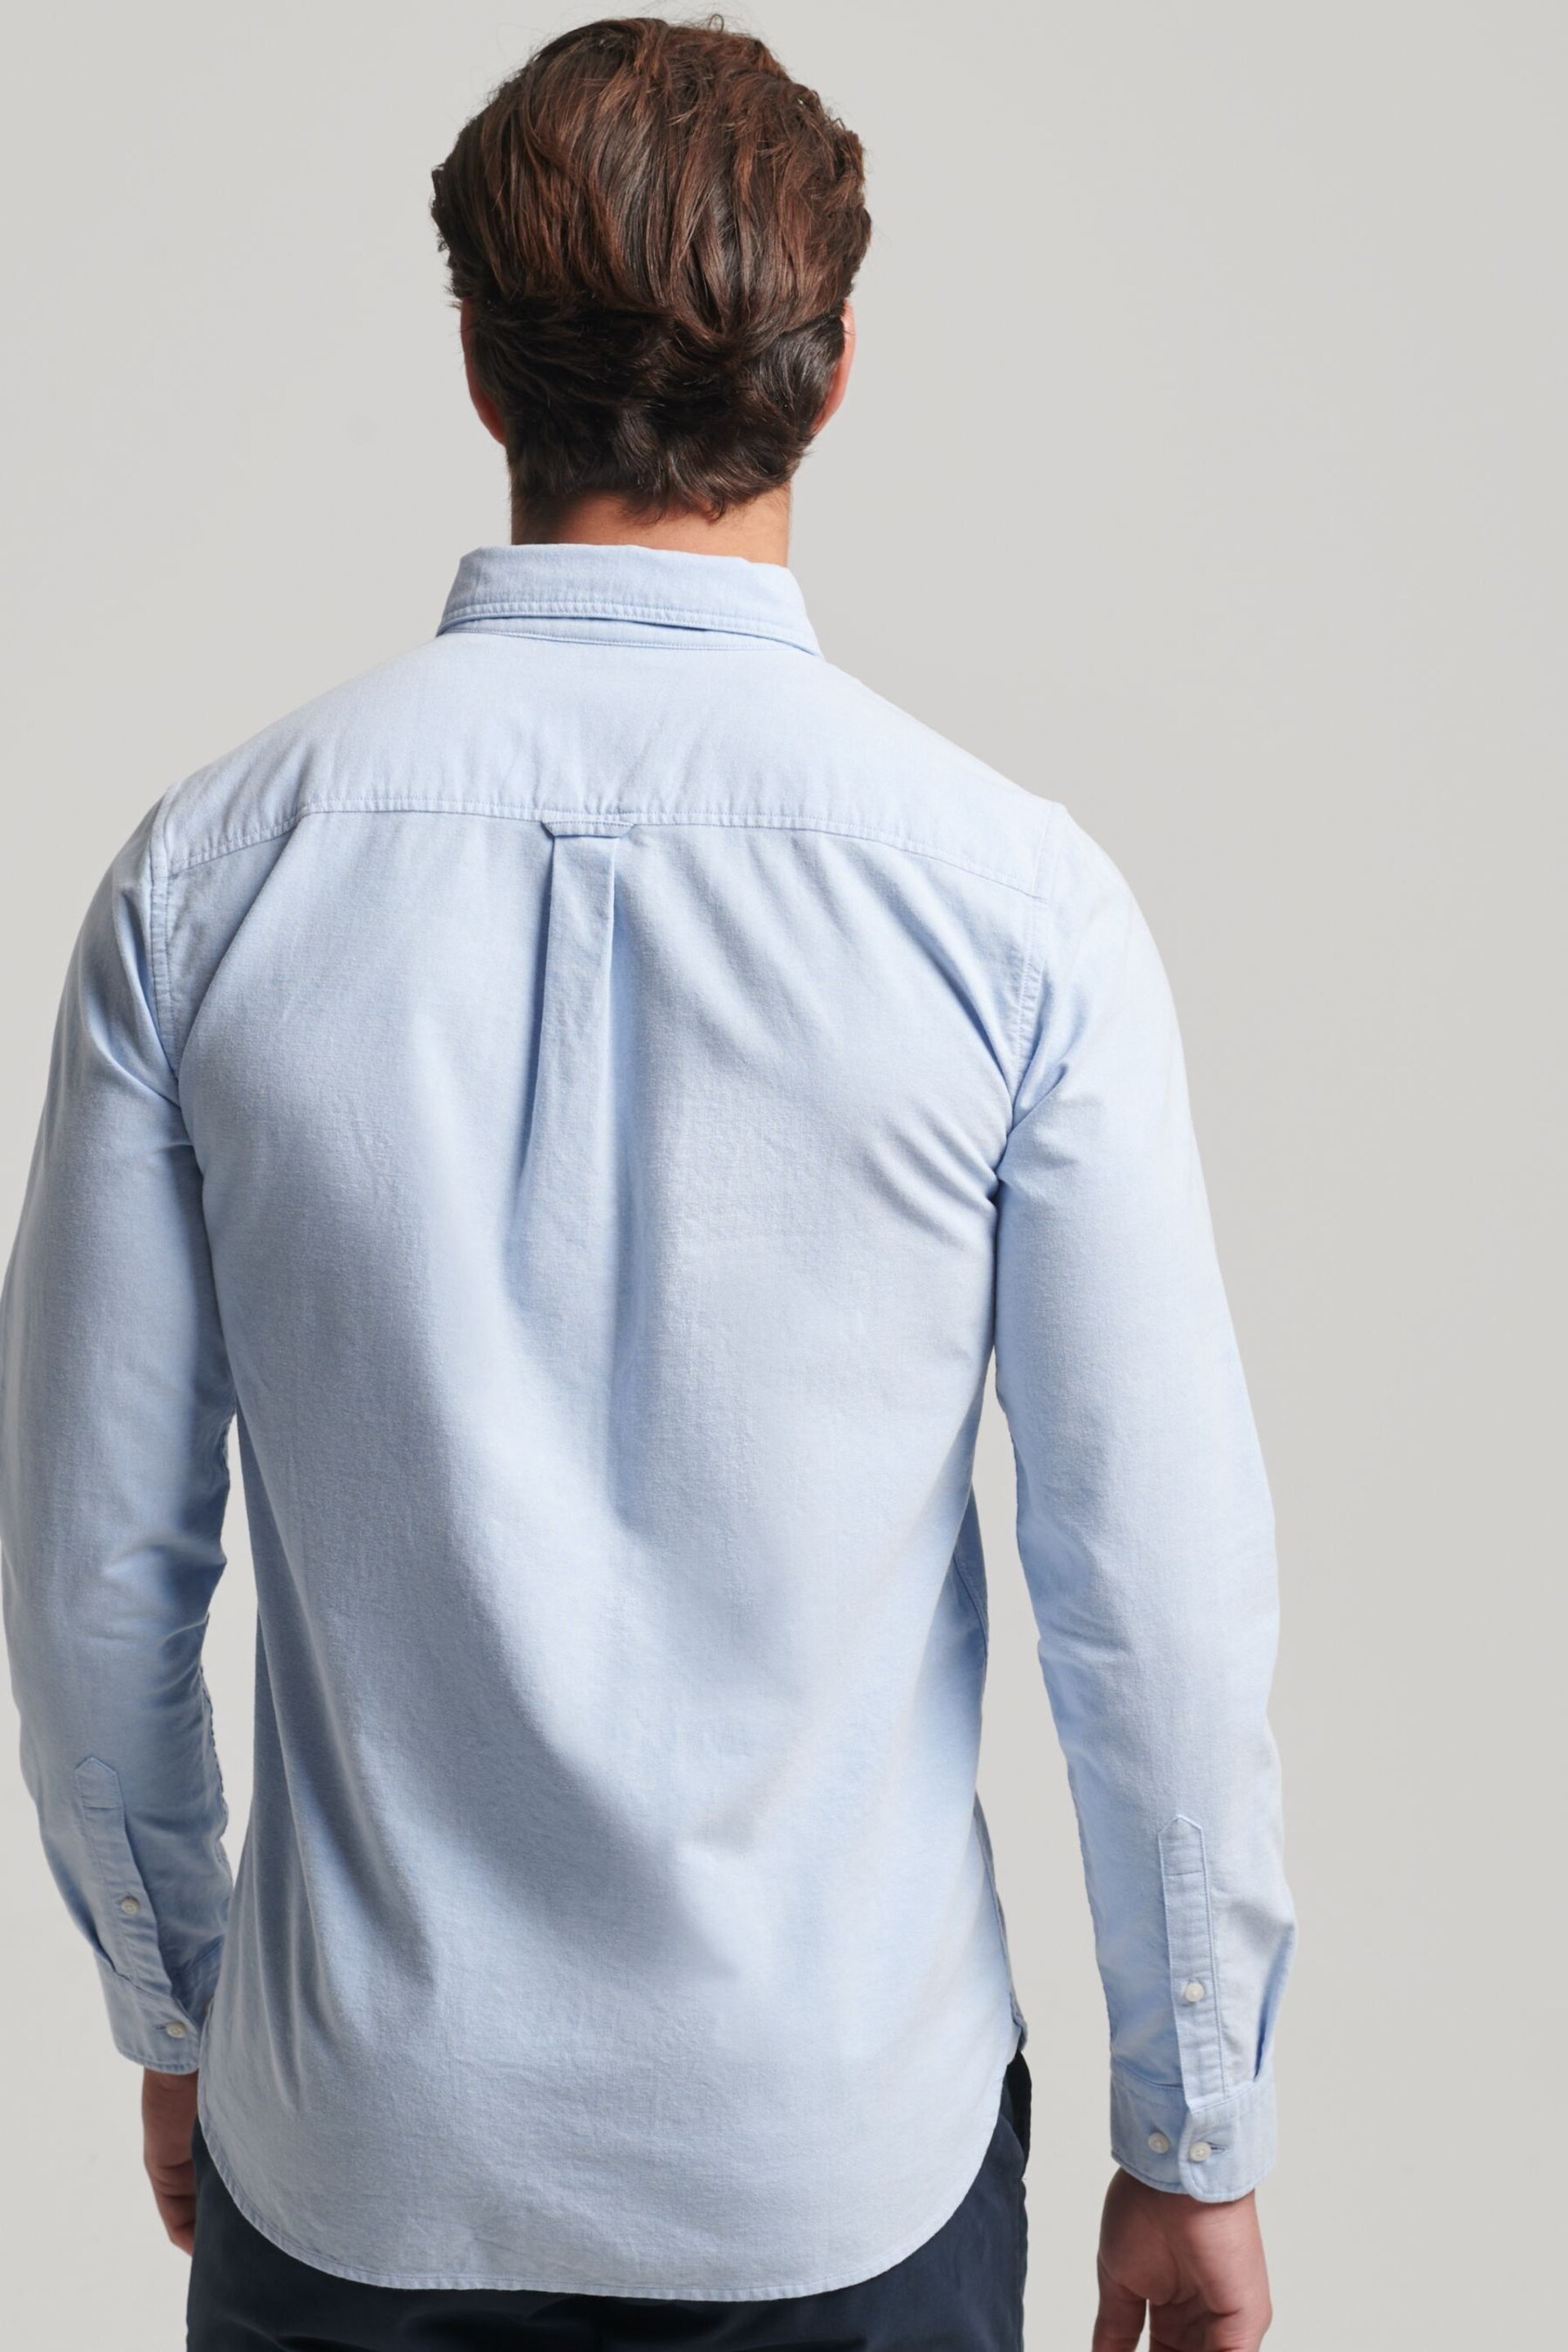 Superdry Classic Blue Oxford Cotton Long Sleeved Oxford Shirt - Image 3 of 7